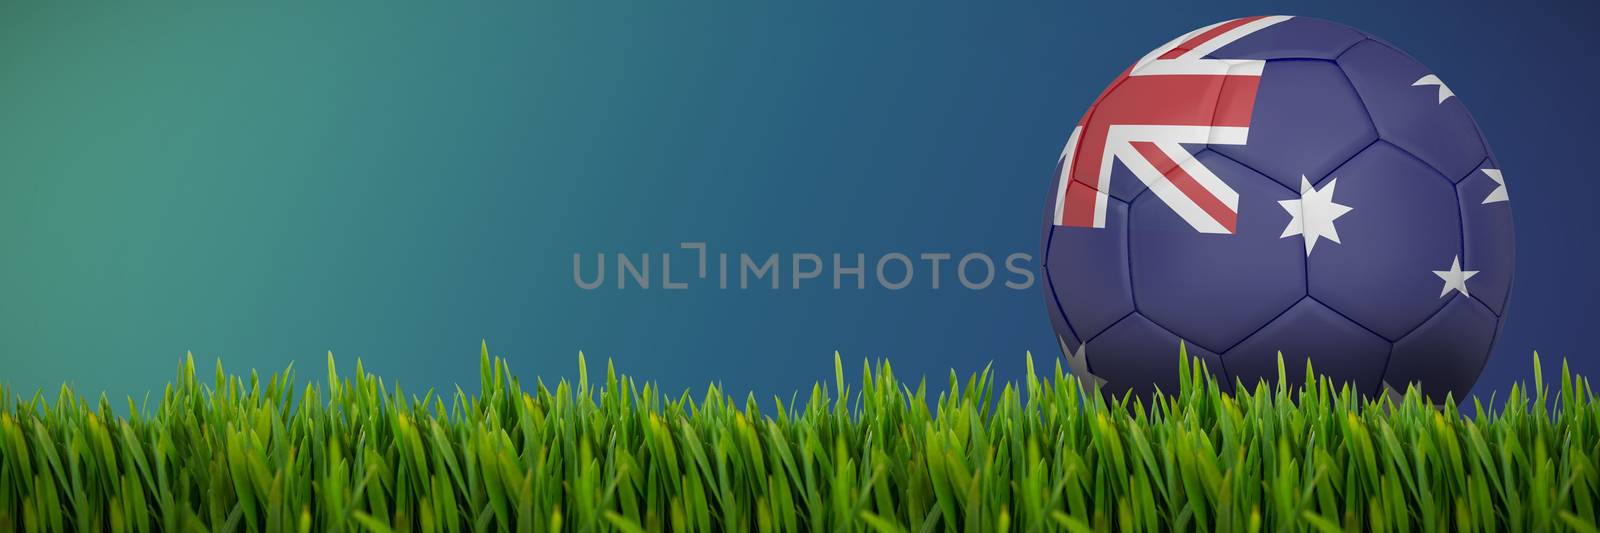 Composite image of grass growing outdoors by Wavebreakmedia